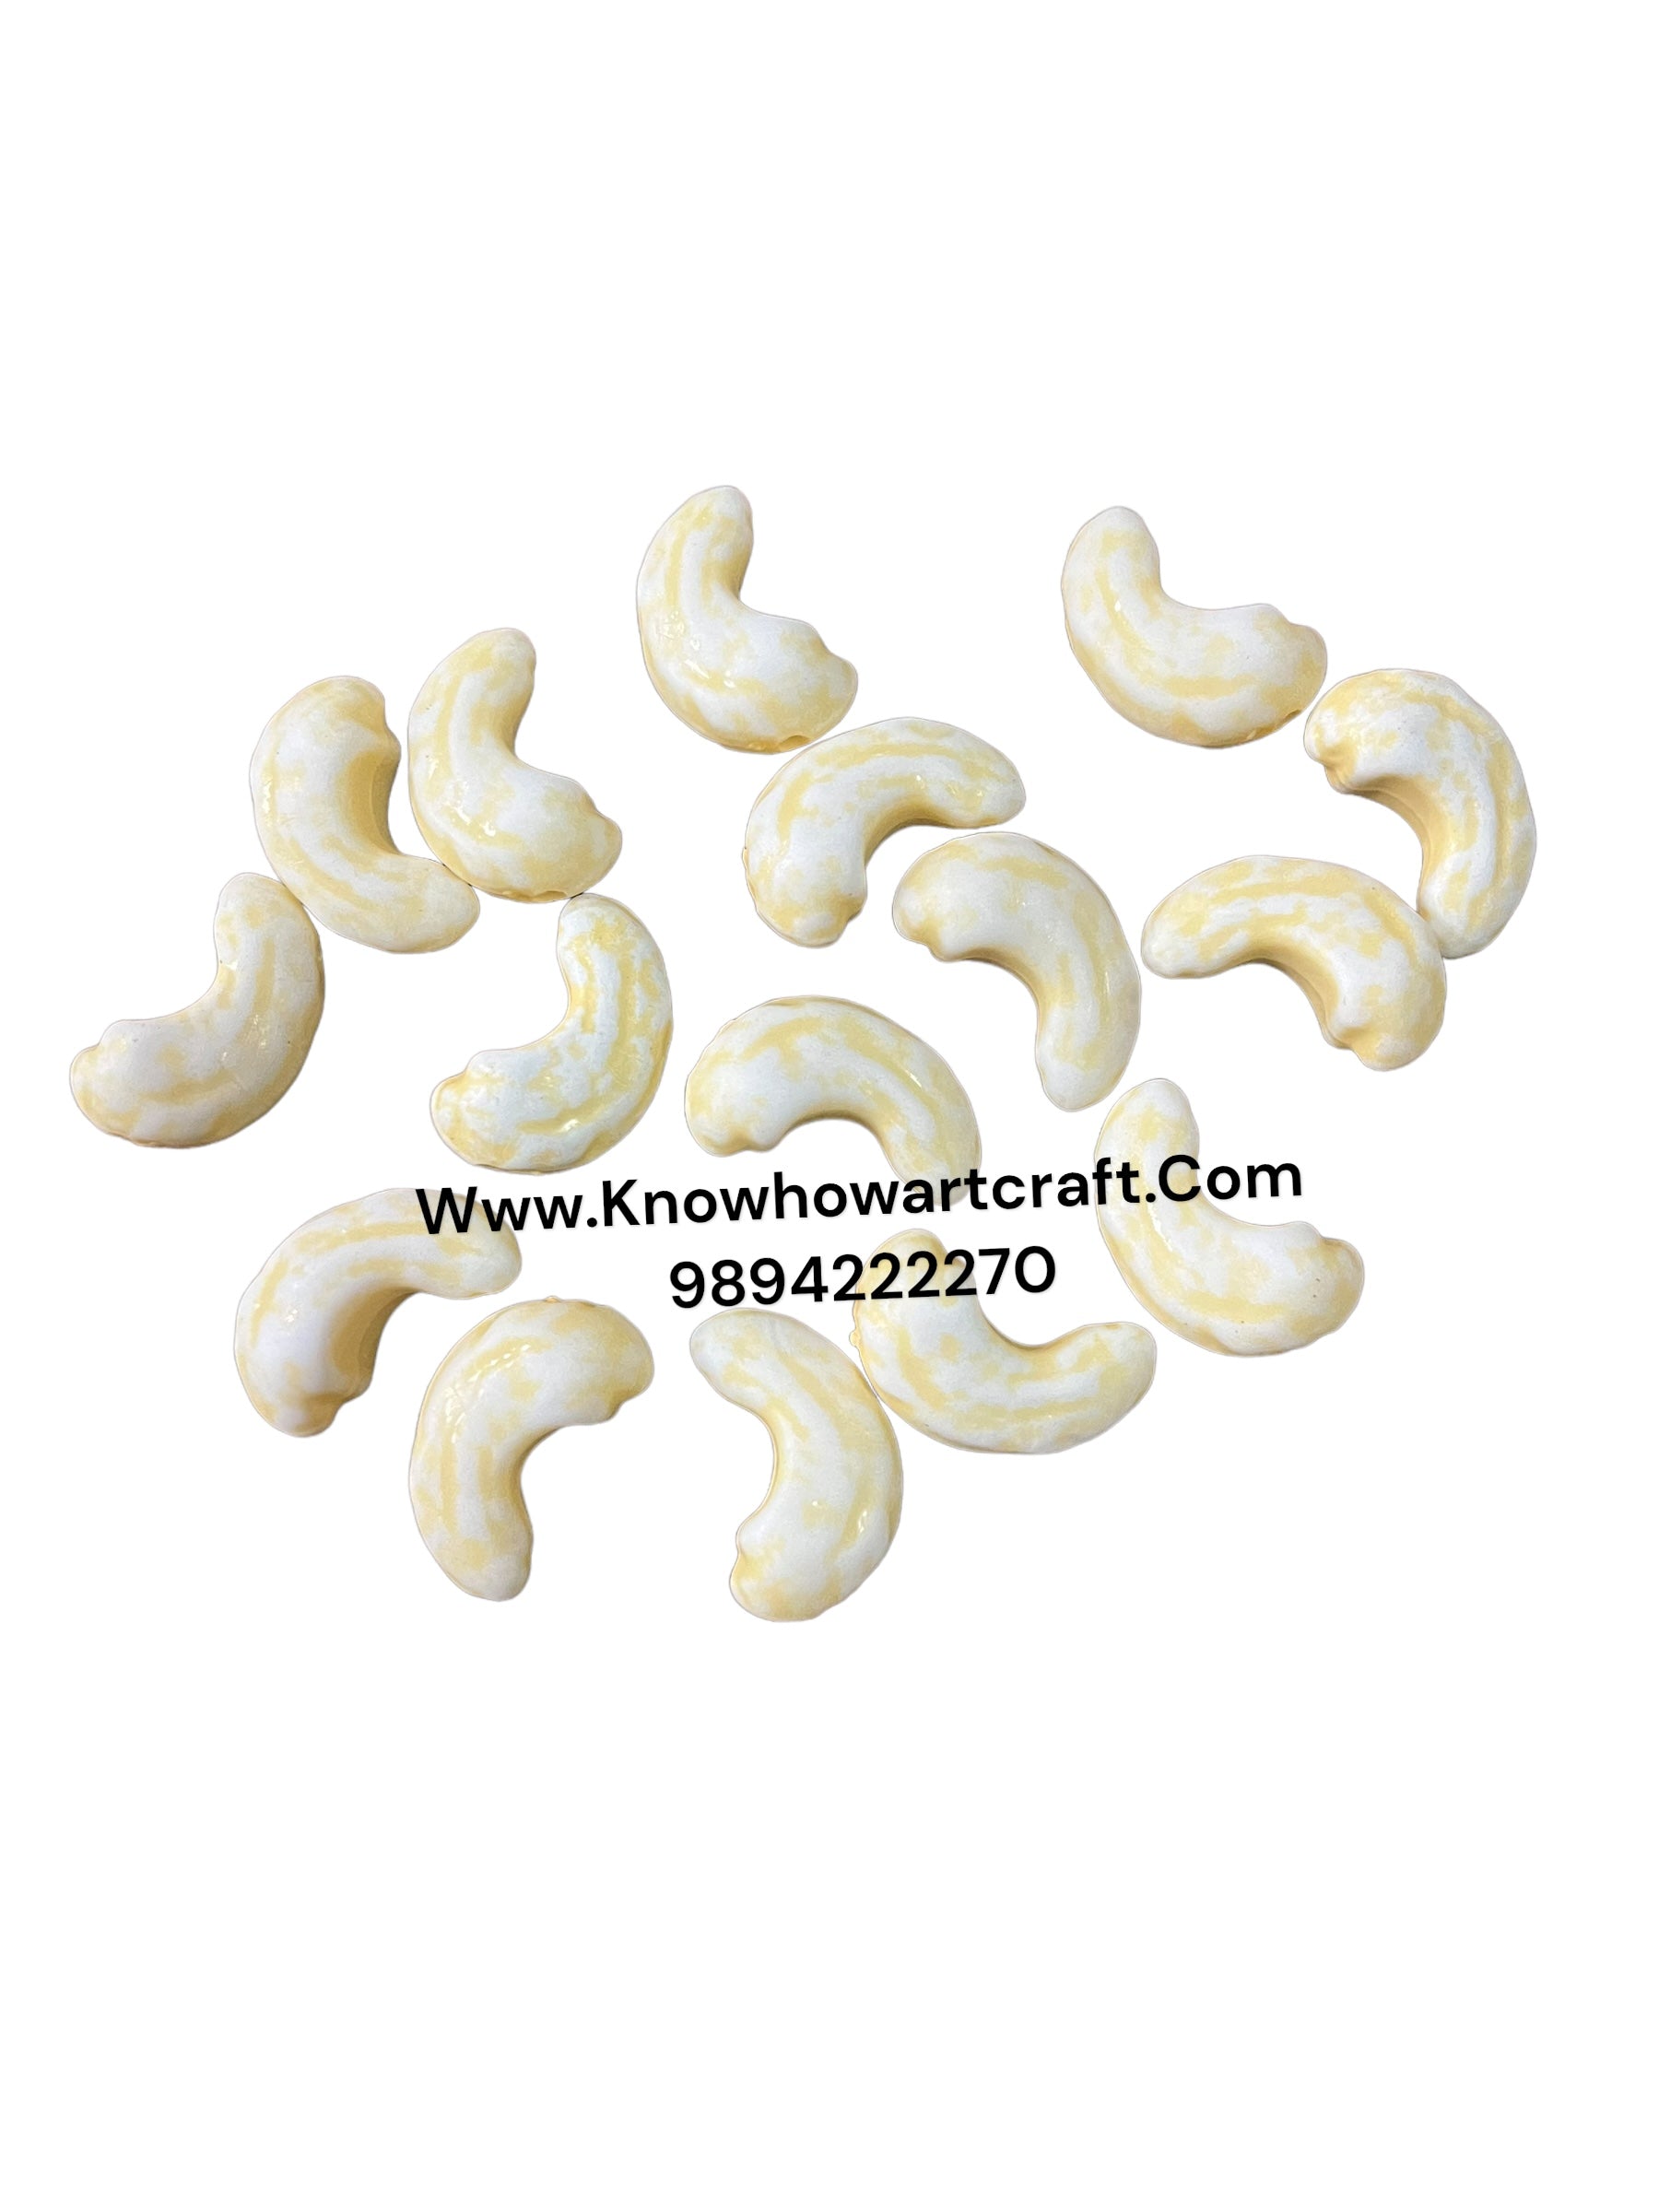 Cashew beads 50g in a pack